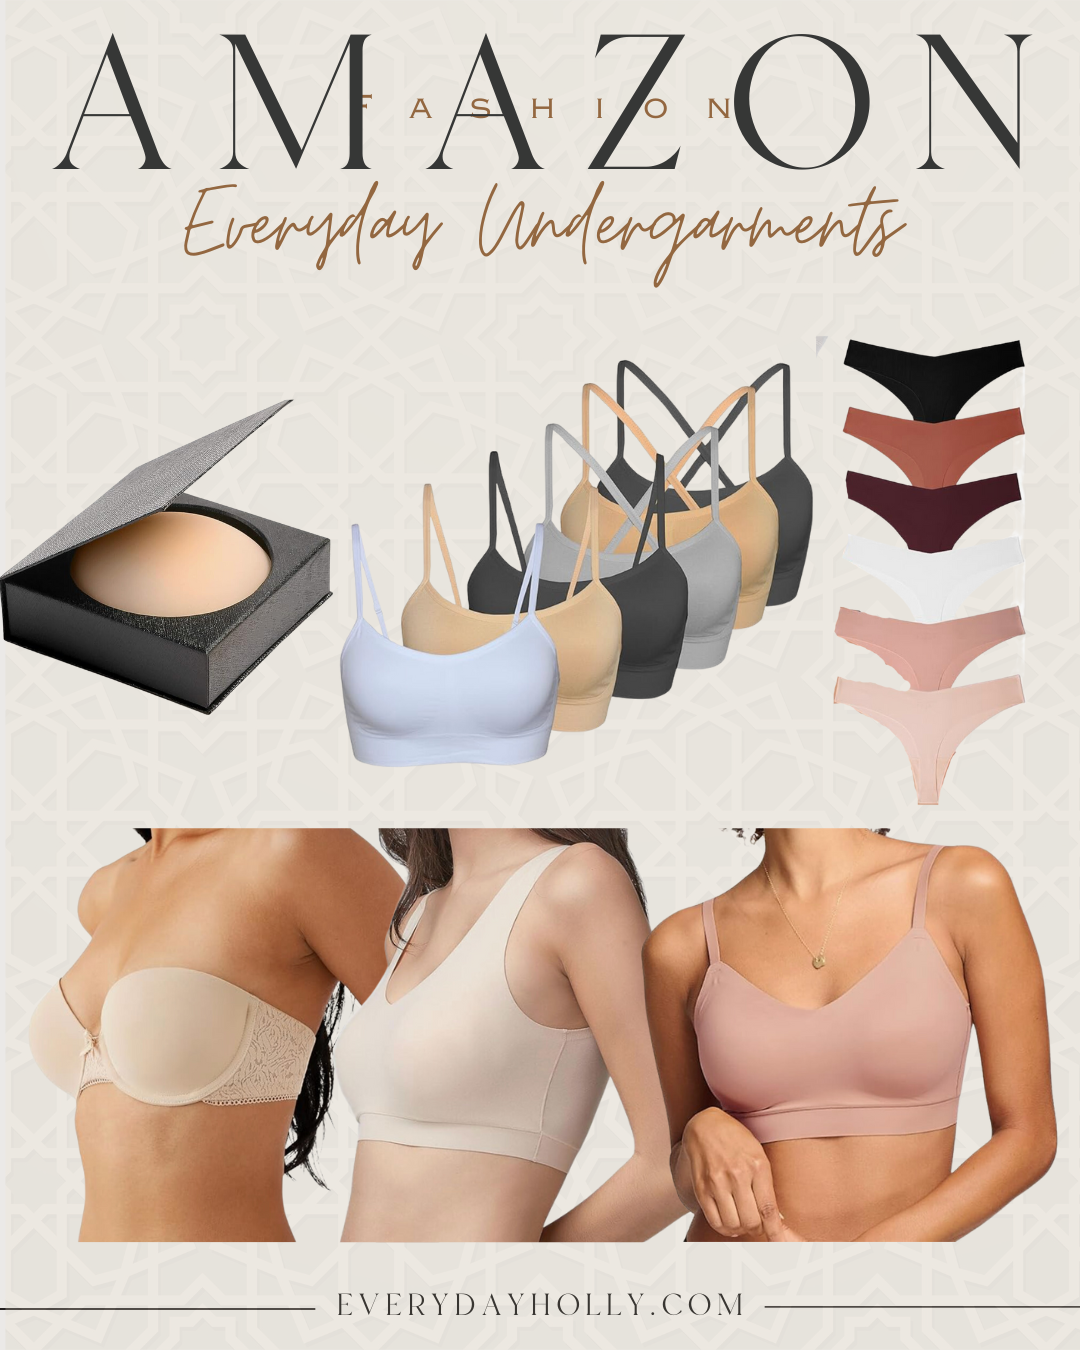 summer wardrobe essentials affordable everyday and casual outfit ideas | summer, summer outfit, everyday outfit, casual outfit, amazon, undergarments, nipple covers, sports bra, comfy bra, supportive bra, strapless bra, seamless 